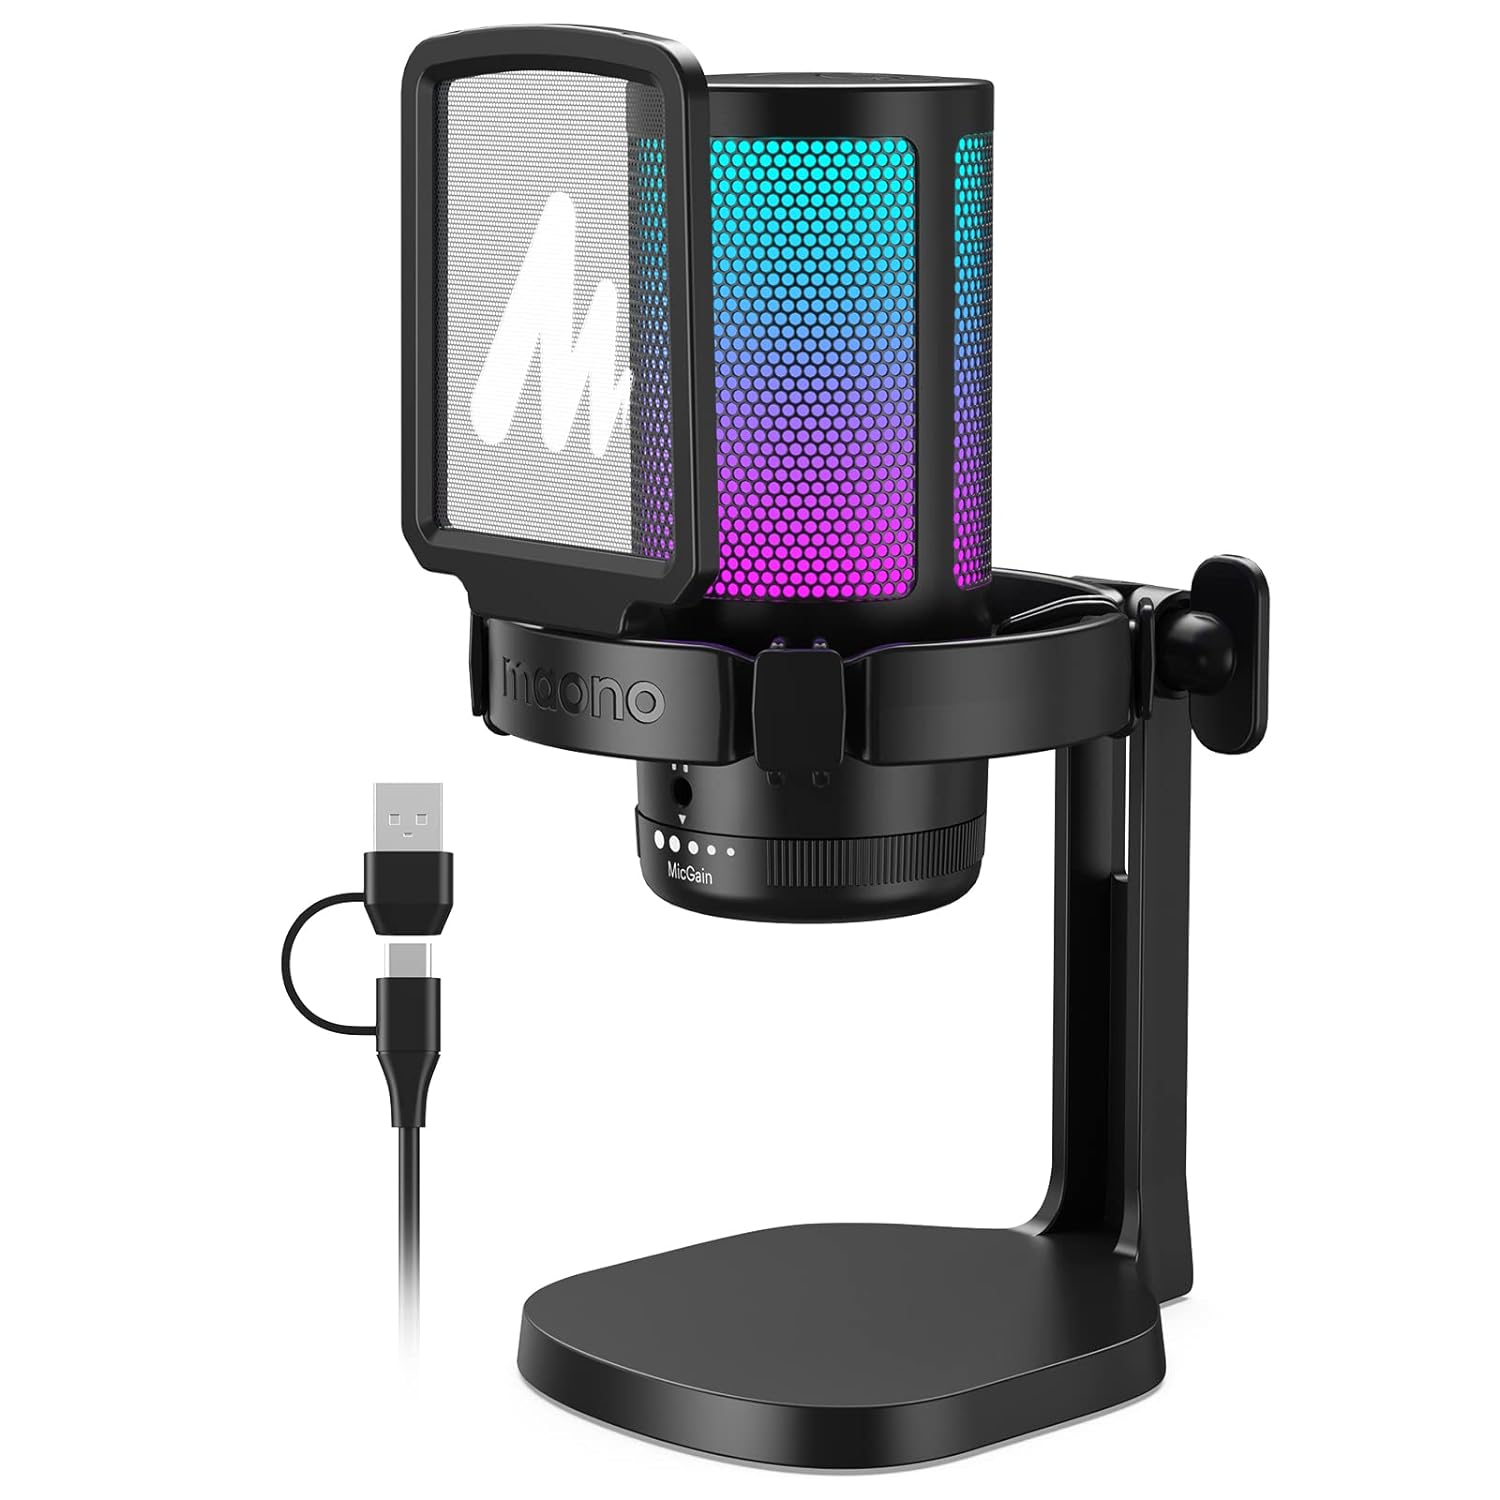 Maono USB Gaming Microphone for PC, Condenser Mic with Noise Cancellation, RGB Lights, Mute, Gain for Streaming, Recording, Podcast, Chat, Twitch, YouTube, Discord, Computer, PS5, PS4, GamerWave DM20/DGM20  Black